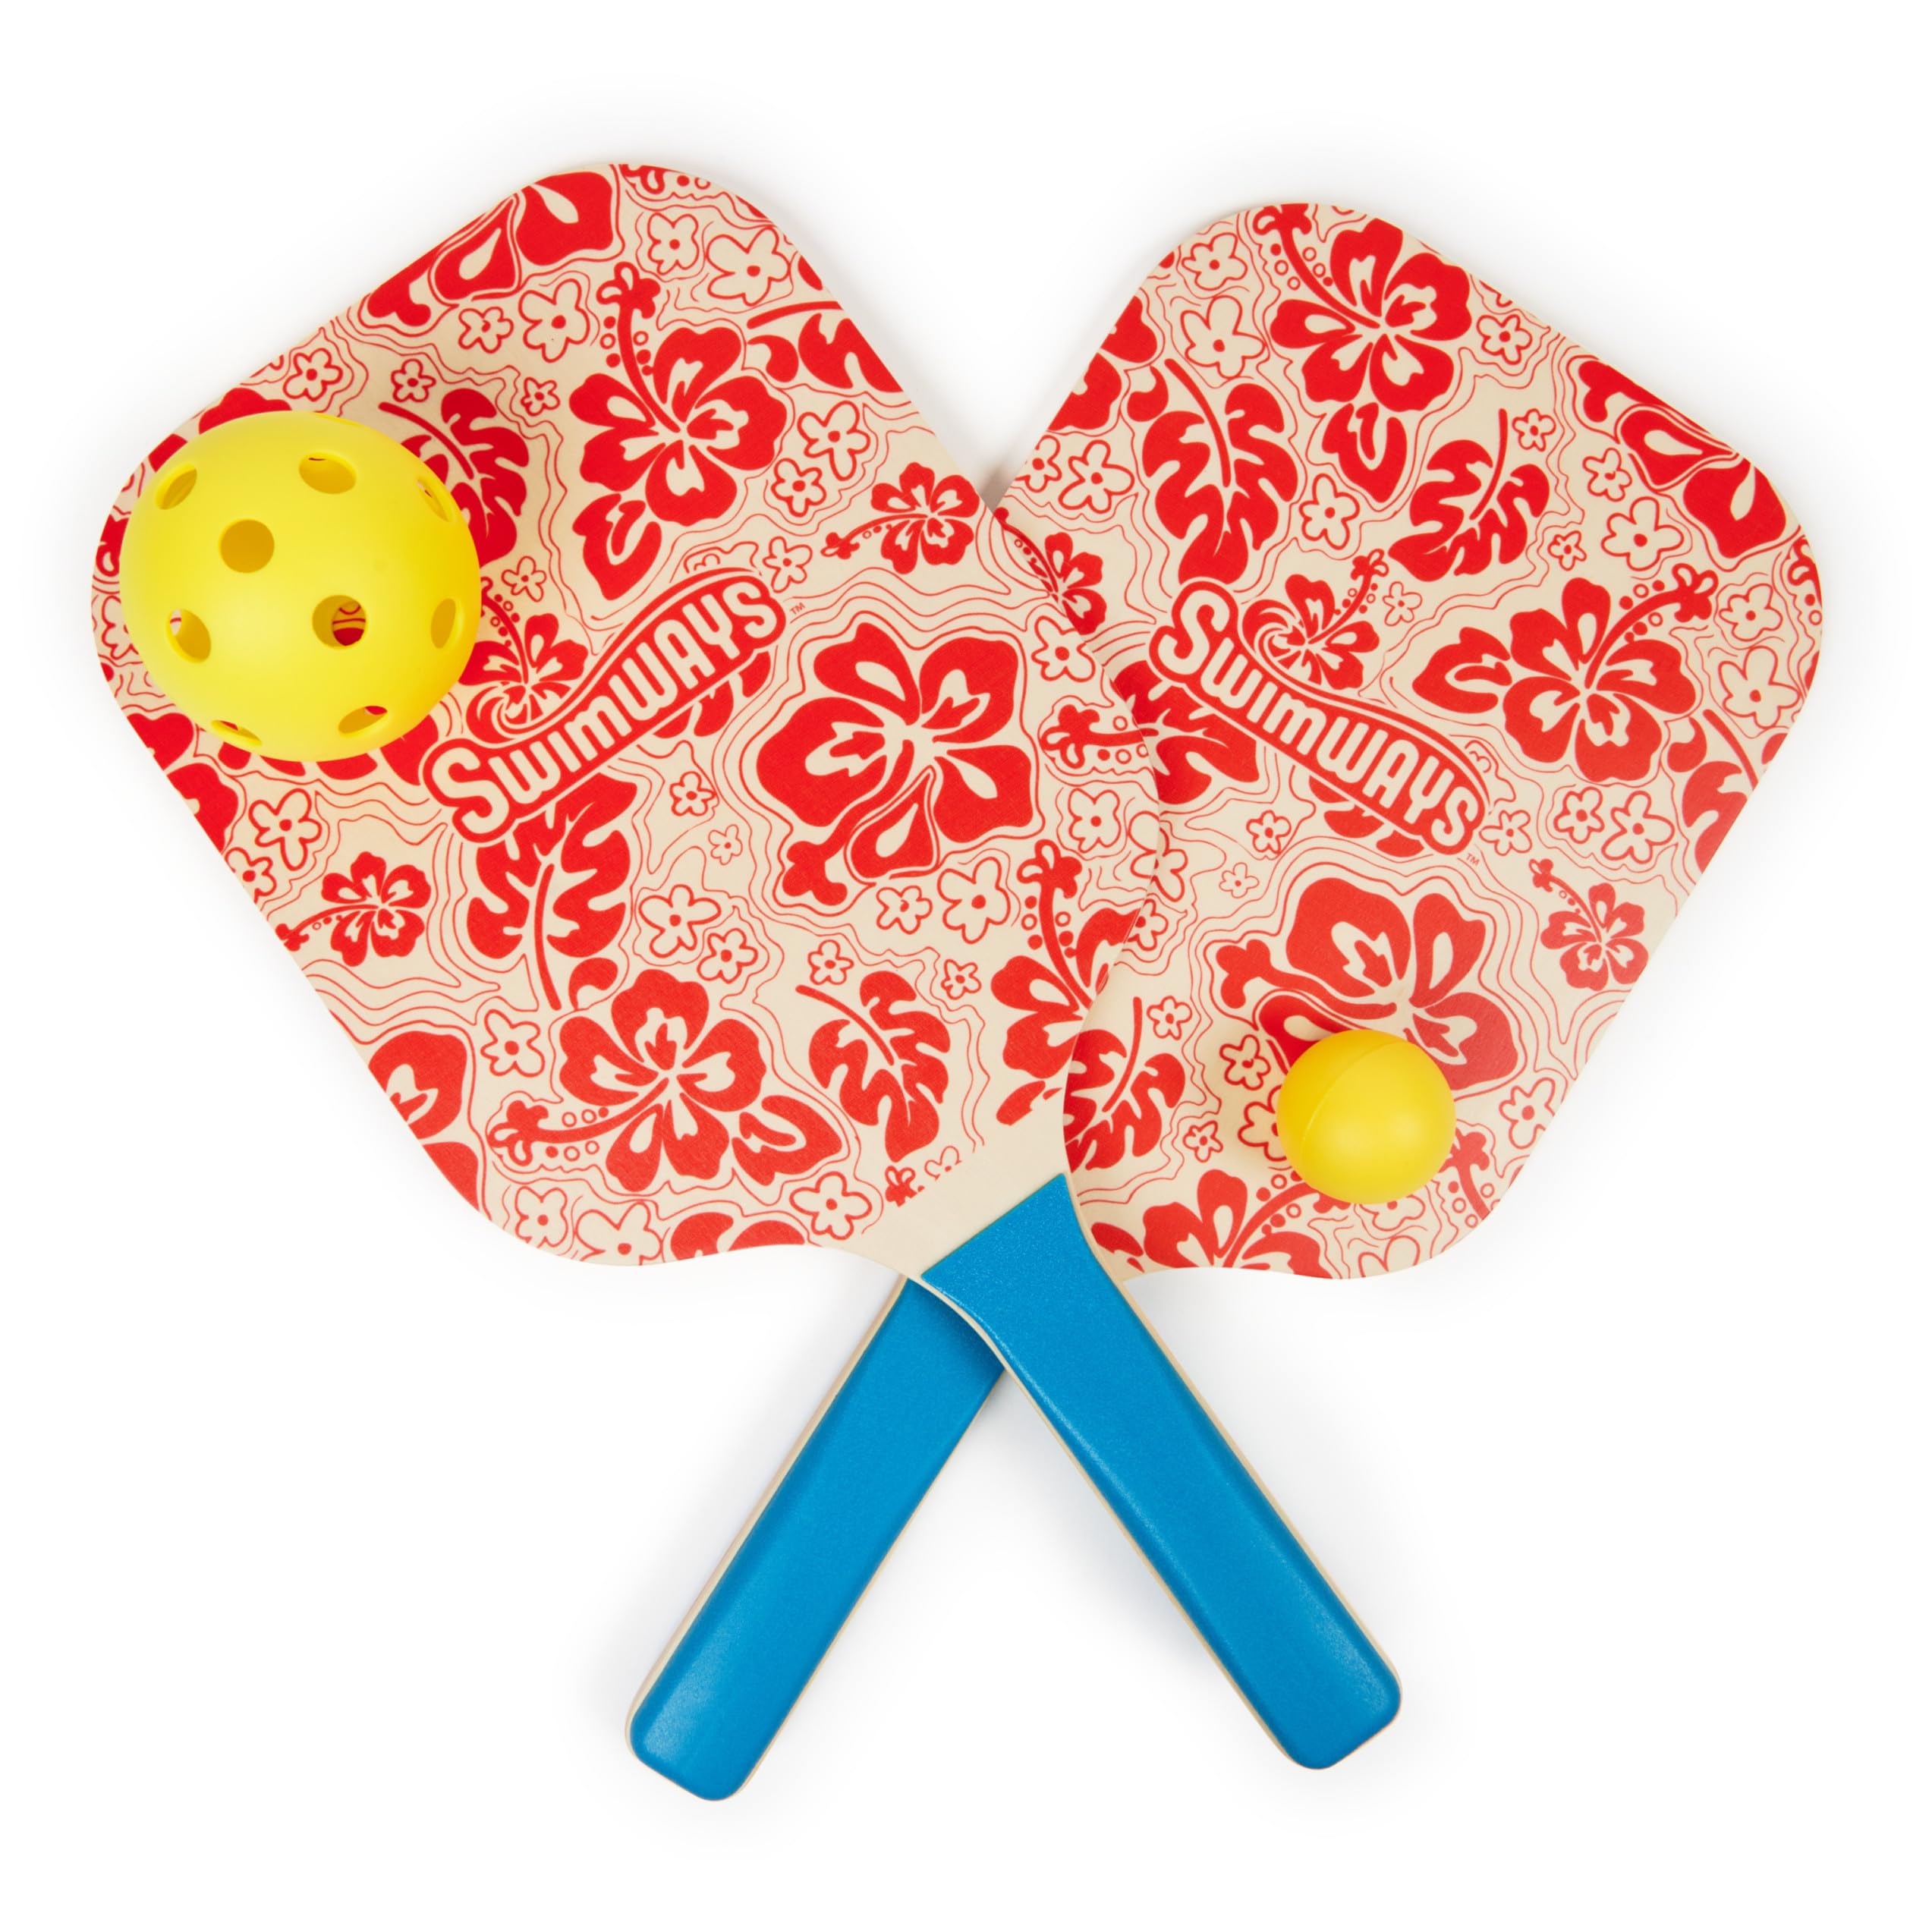 Swimways Hydro Paddle & Pickleball Set, Pickleball Paddles and Balls for Pool, Lake and Beach Games, Outdoor Toys